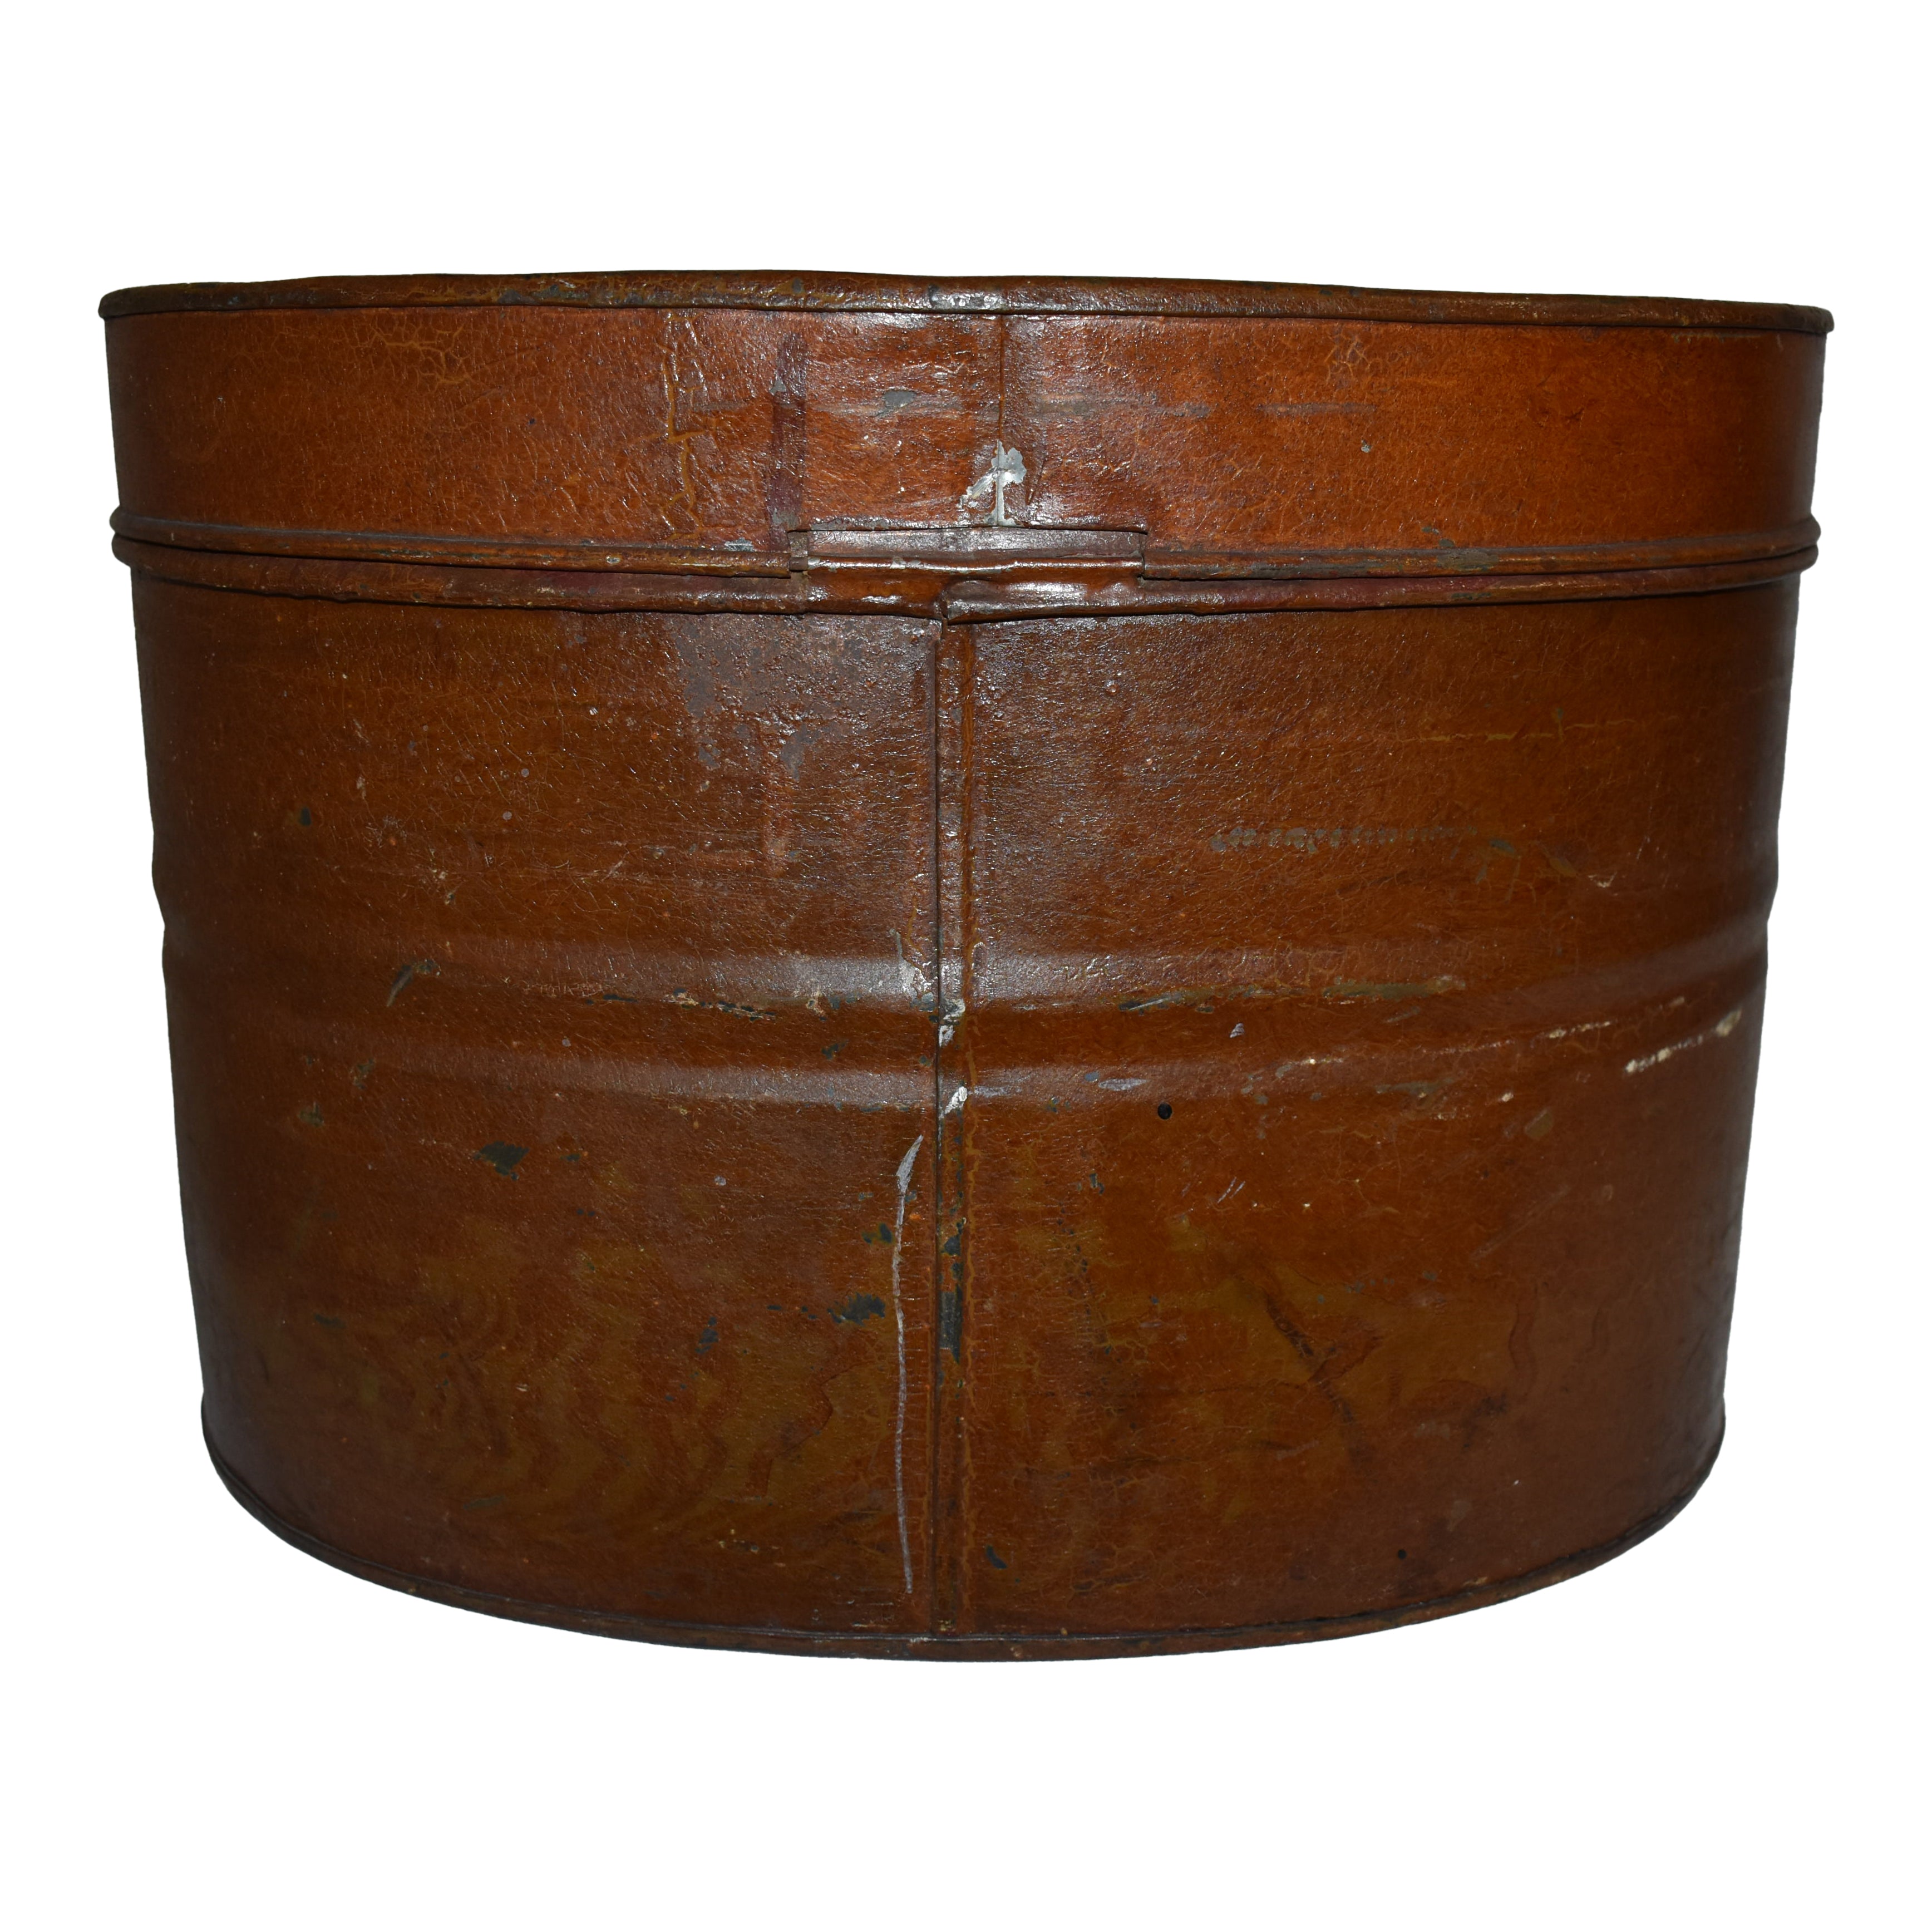 Oval Grain Painted Tin Container with Lid